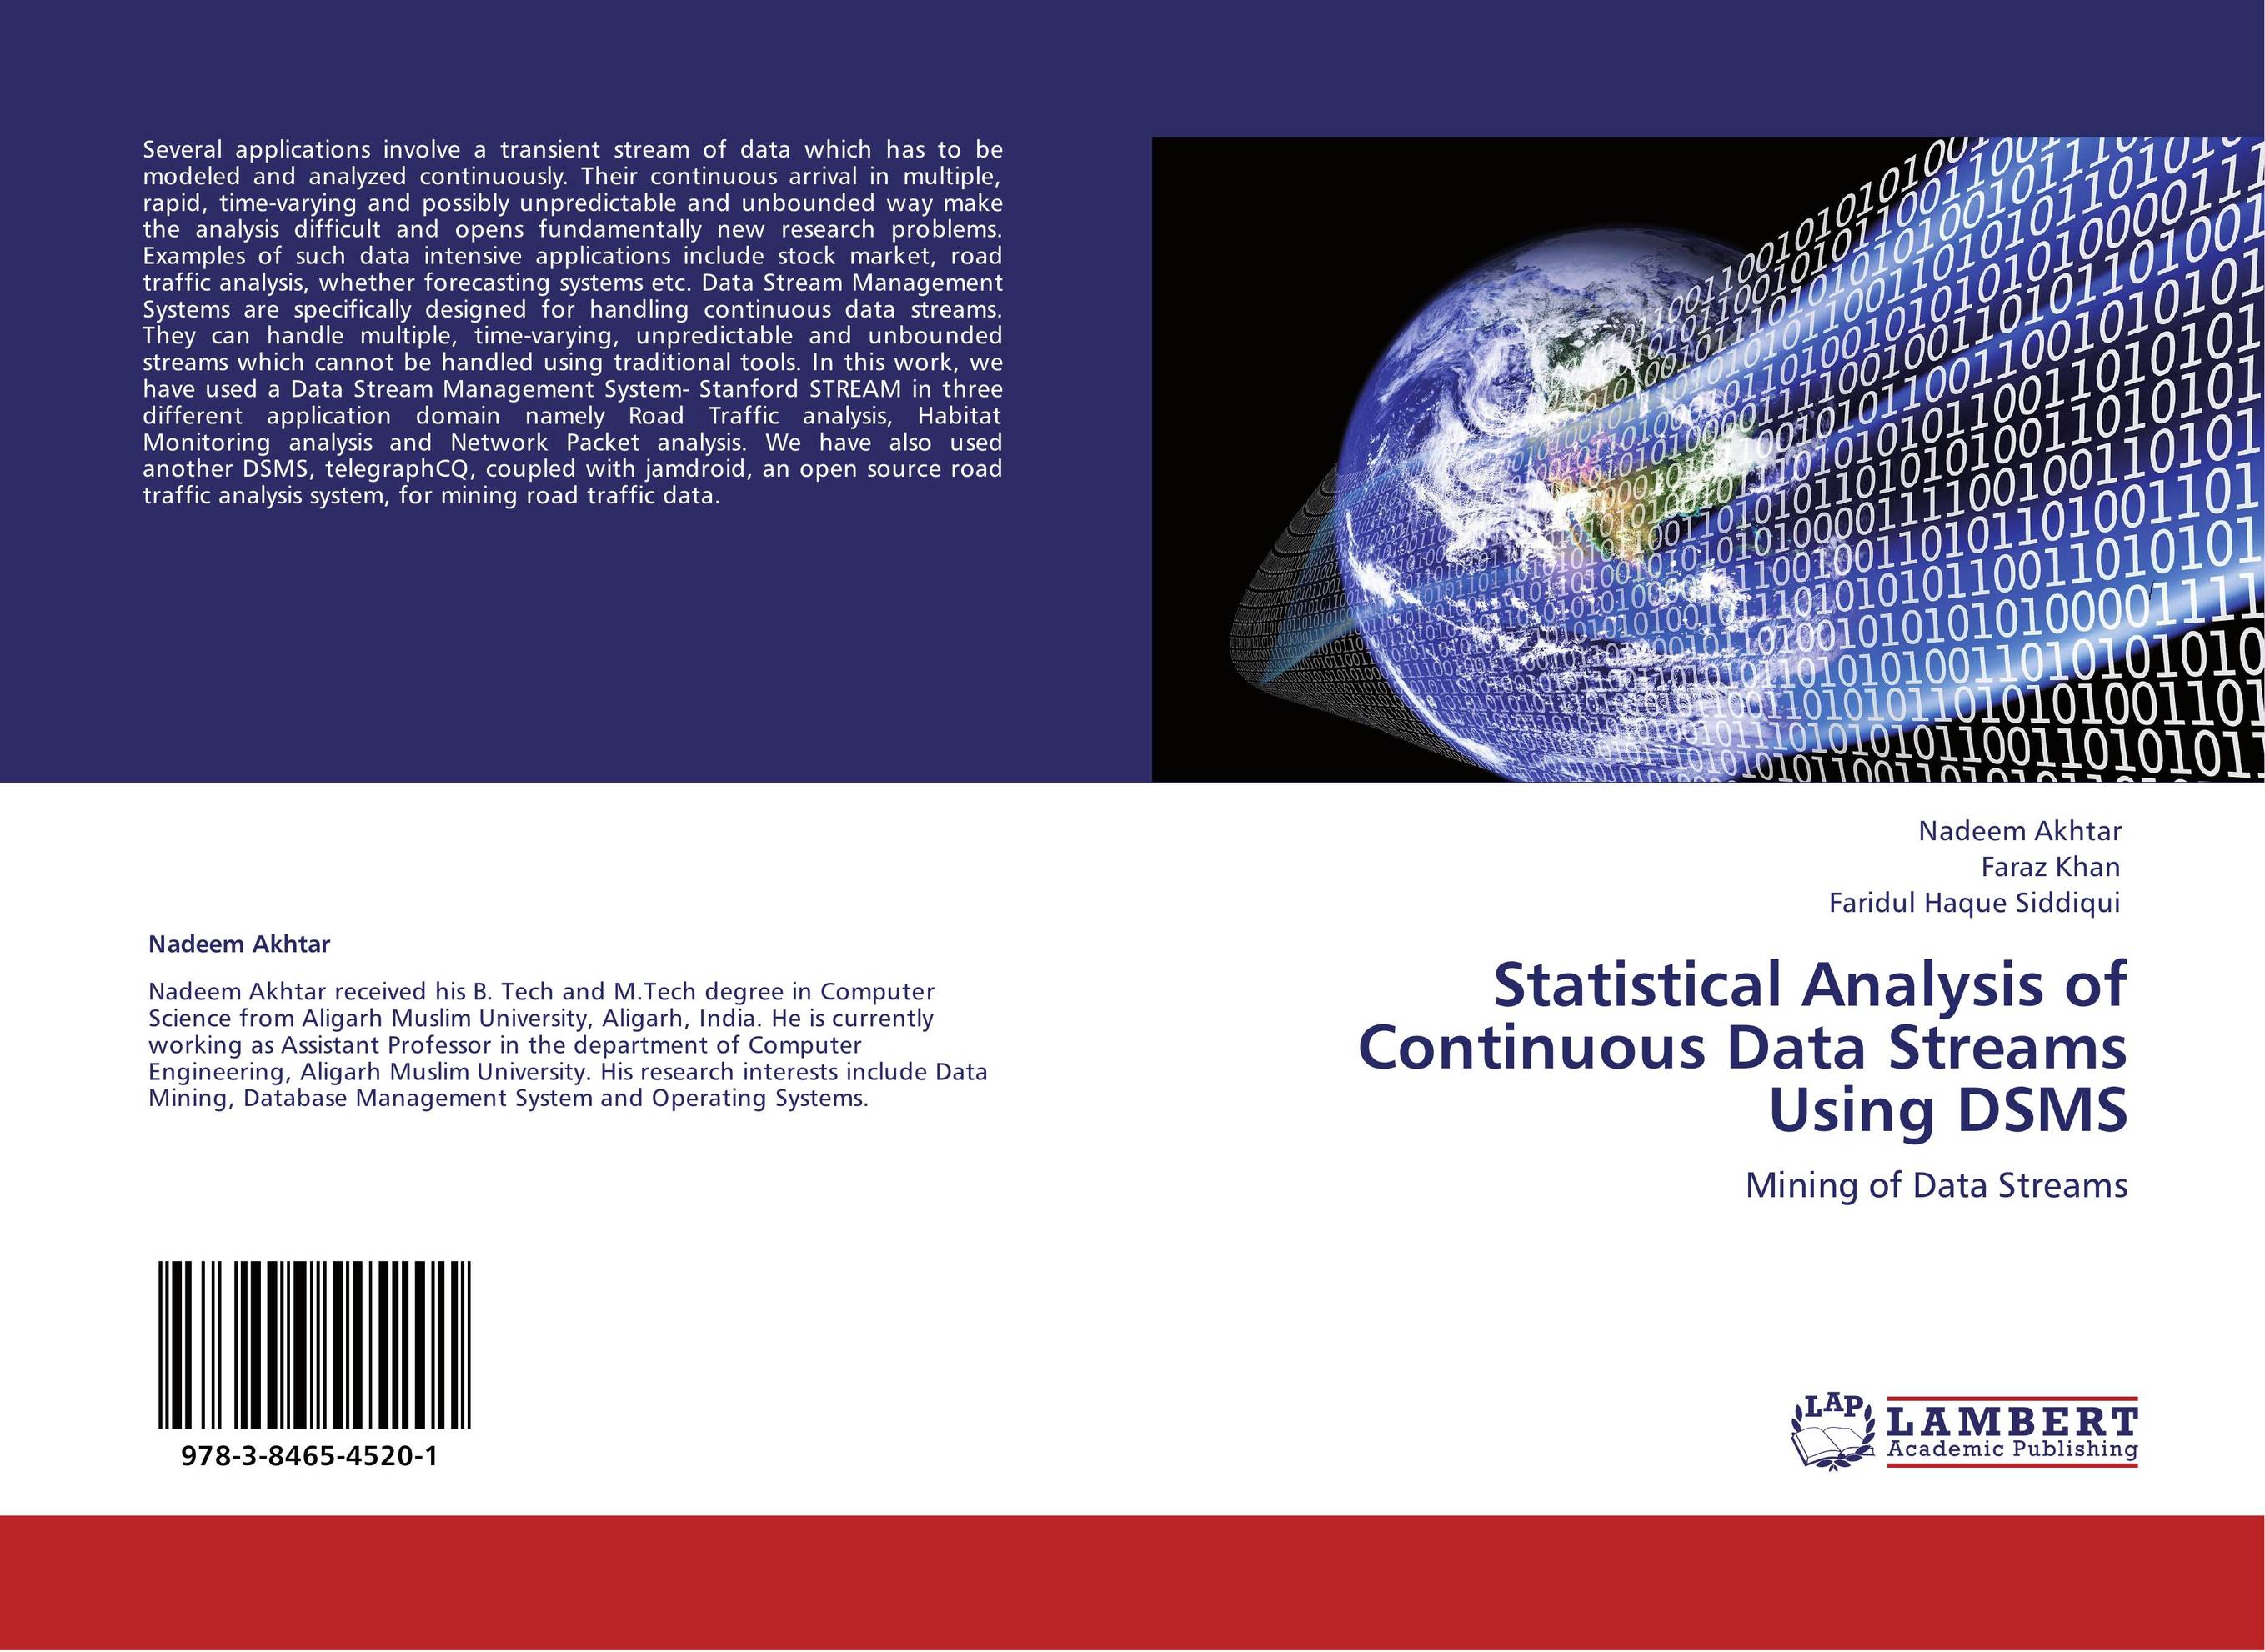 Compress data. Digital image processing algorithms. "Data Stream processing algorithms. System Analysis & Mathematical Modeling журнал. Energy and the social Sciences.